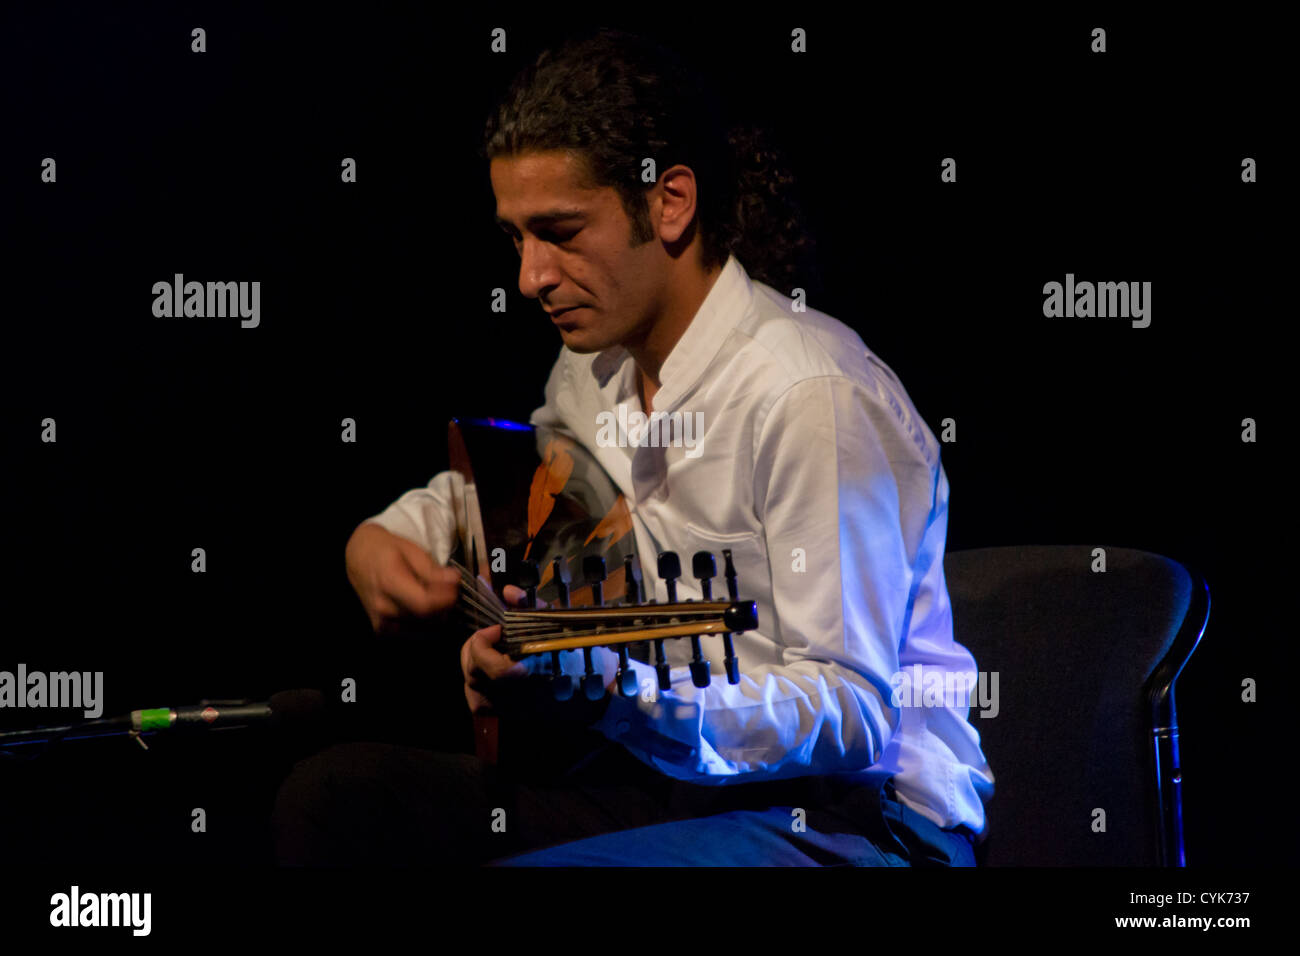 British Iraqi musician Khyam Allami performs live during the WOMEX 12 world music exhibition in Thessaloniki. Stock Photo